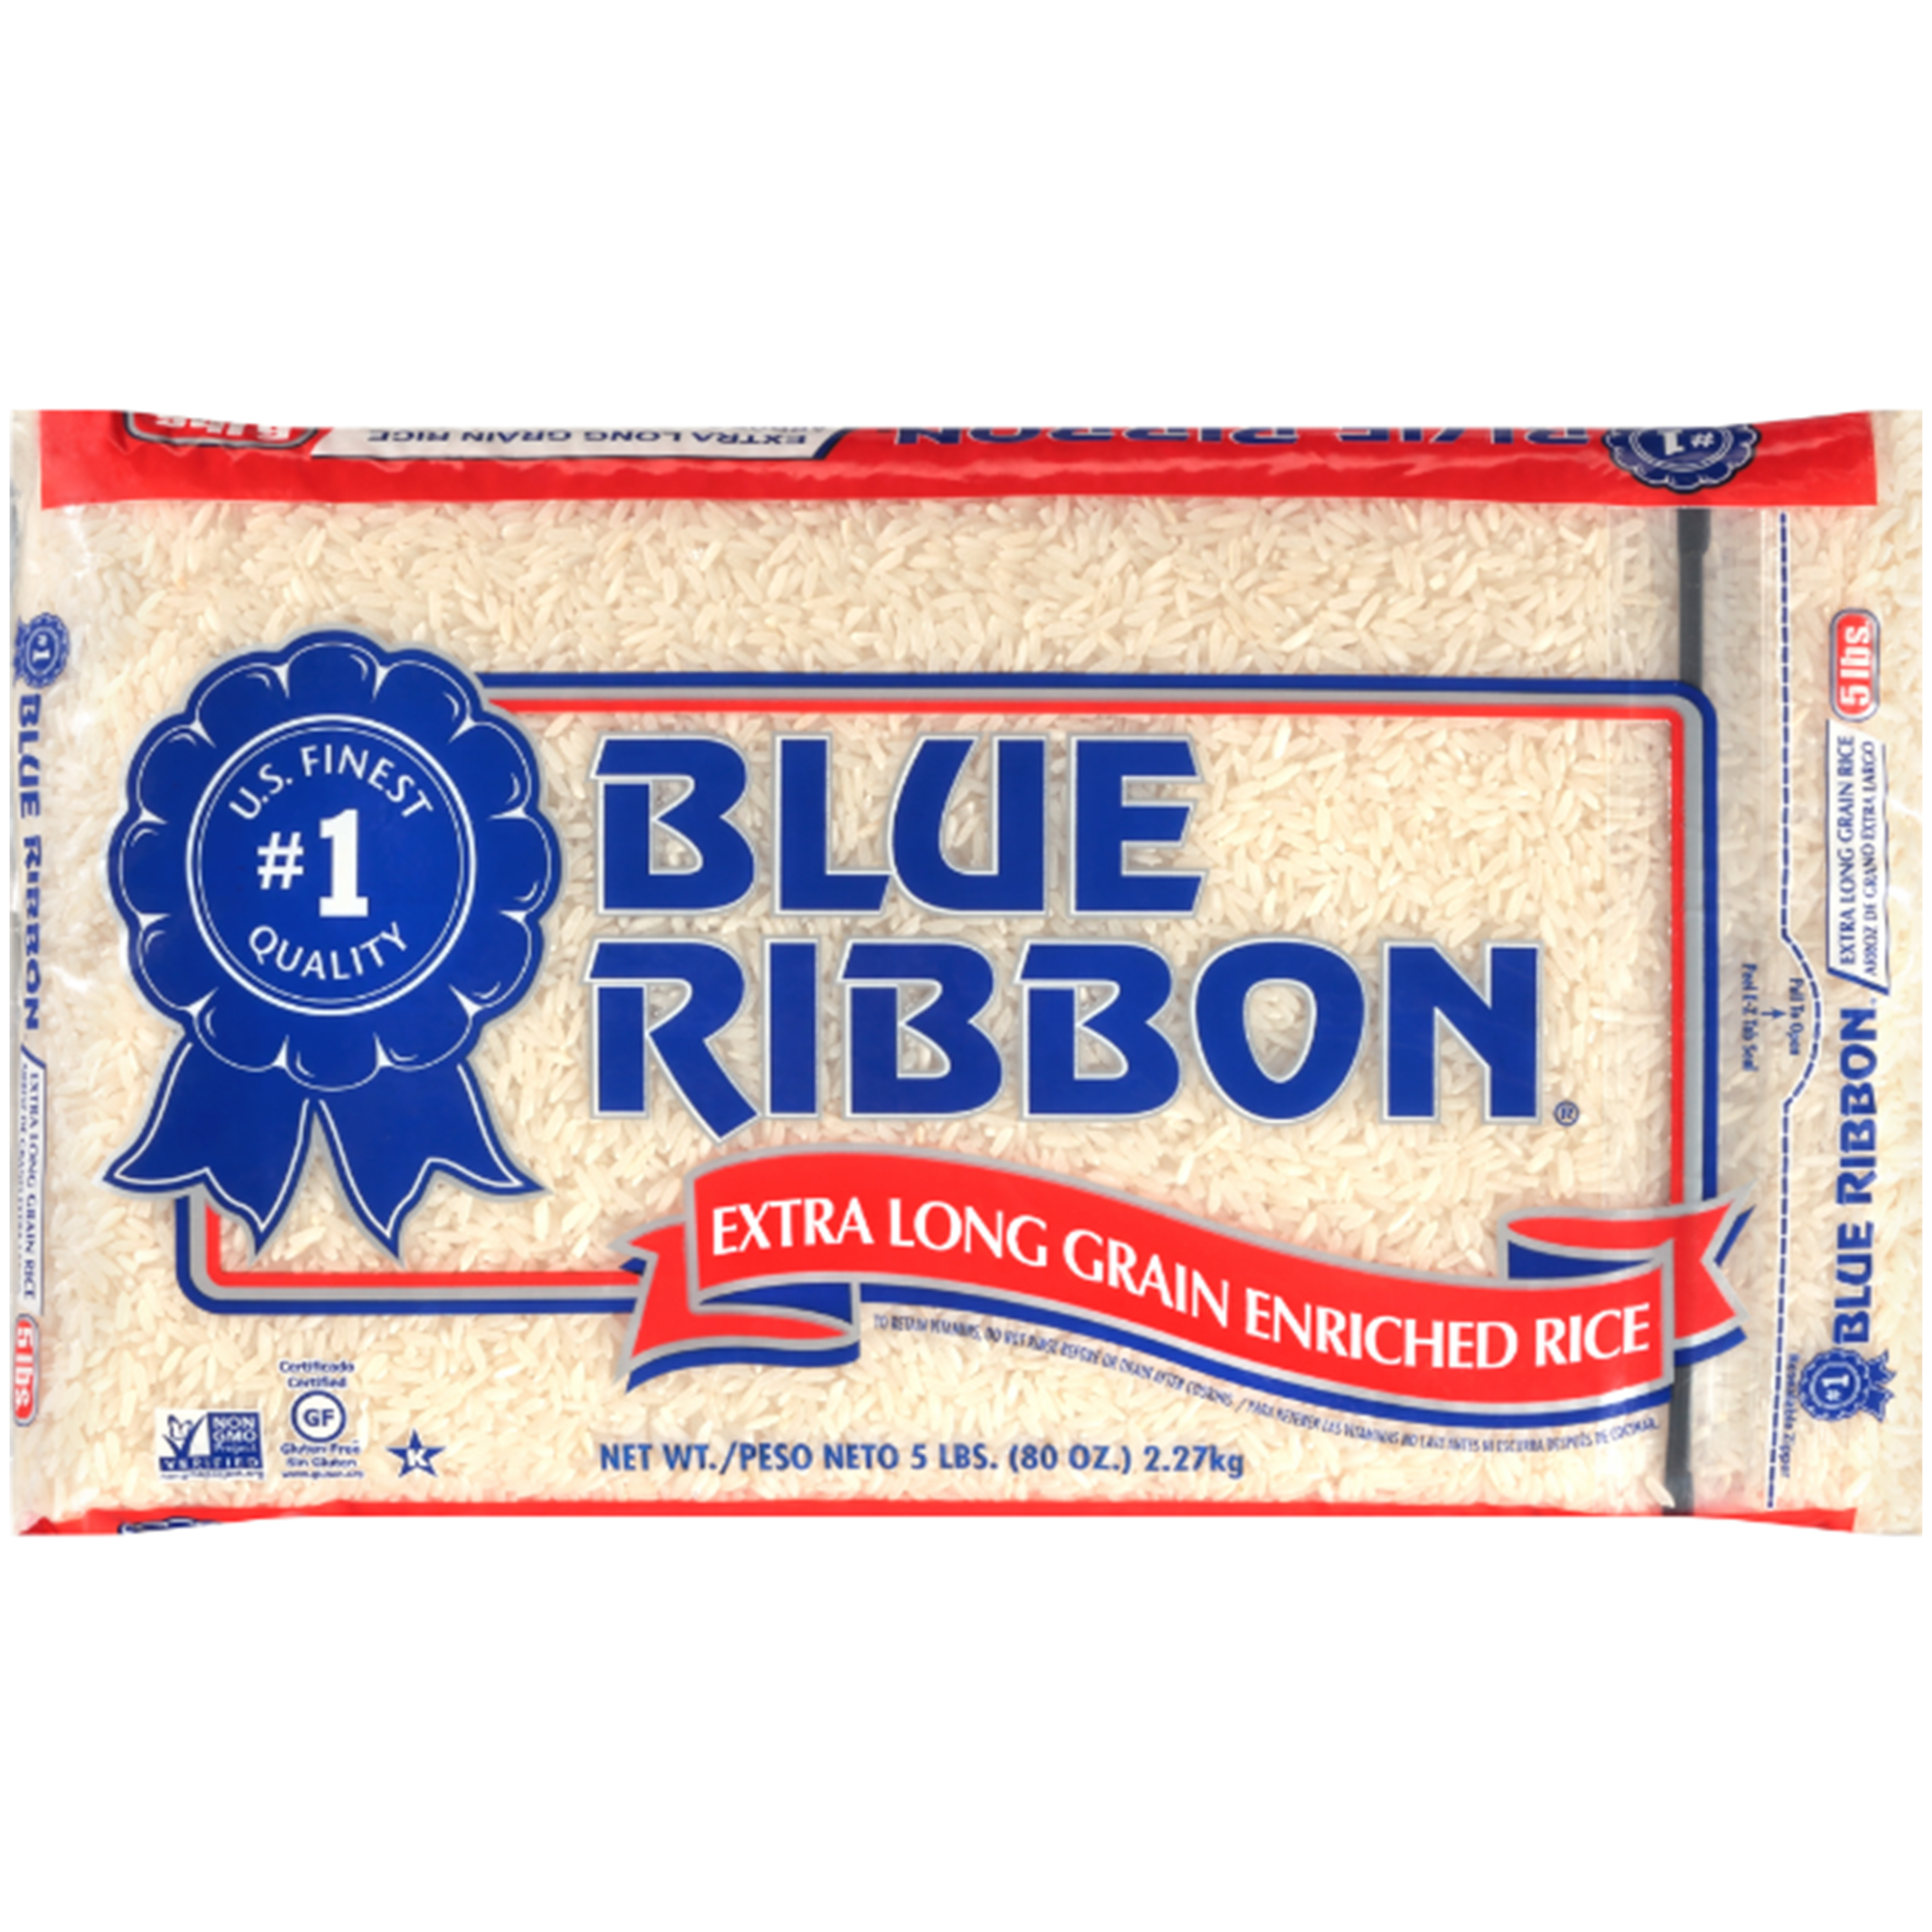 Blue Ribbon White Rice, Extra Long Grain Enriched Rice, 5 lb Bag - image 5 of 5